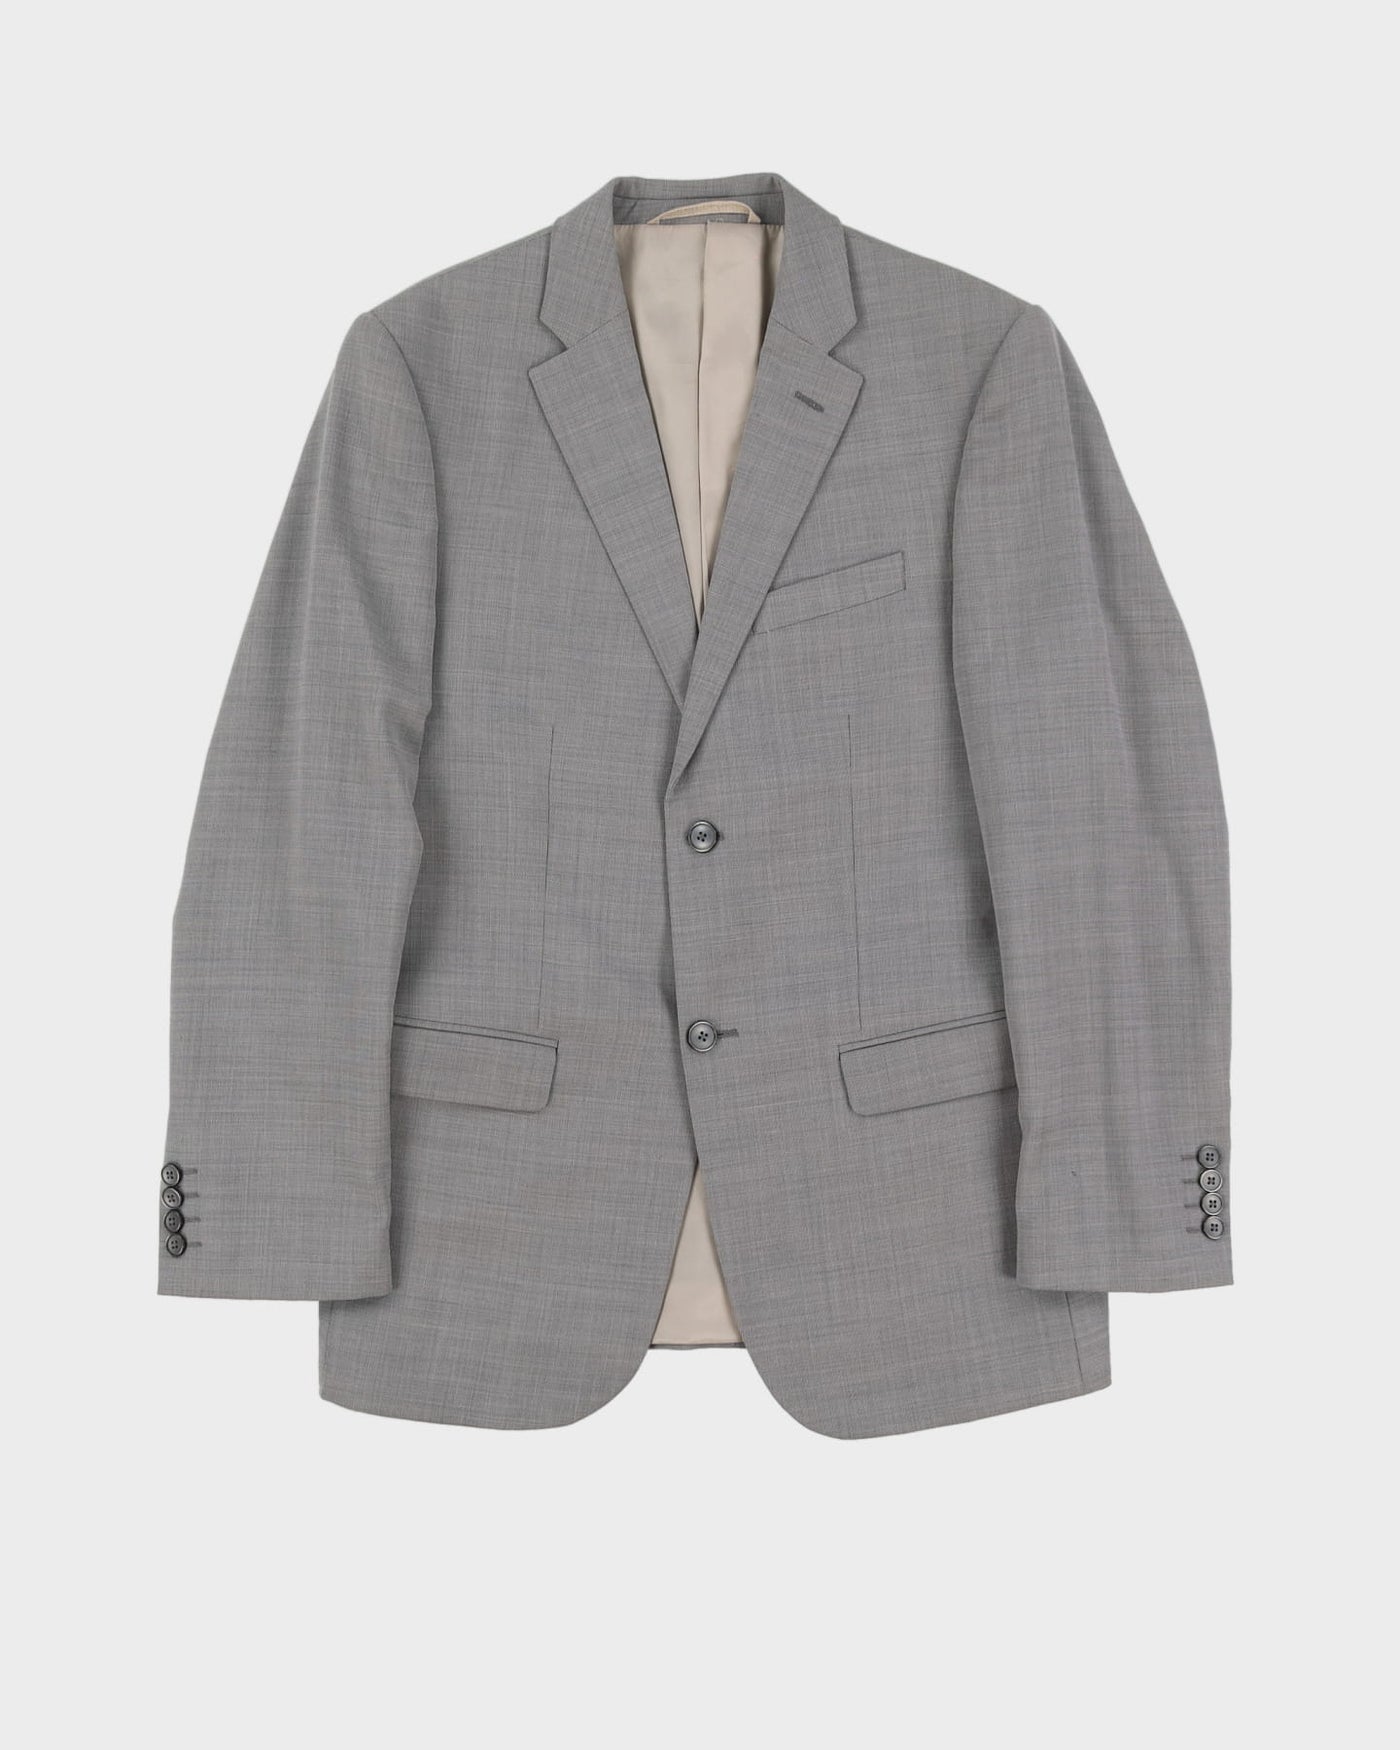 Jones New York Grey Check Patterned 2 Piece Suit - CH40 W32